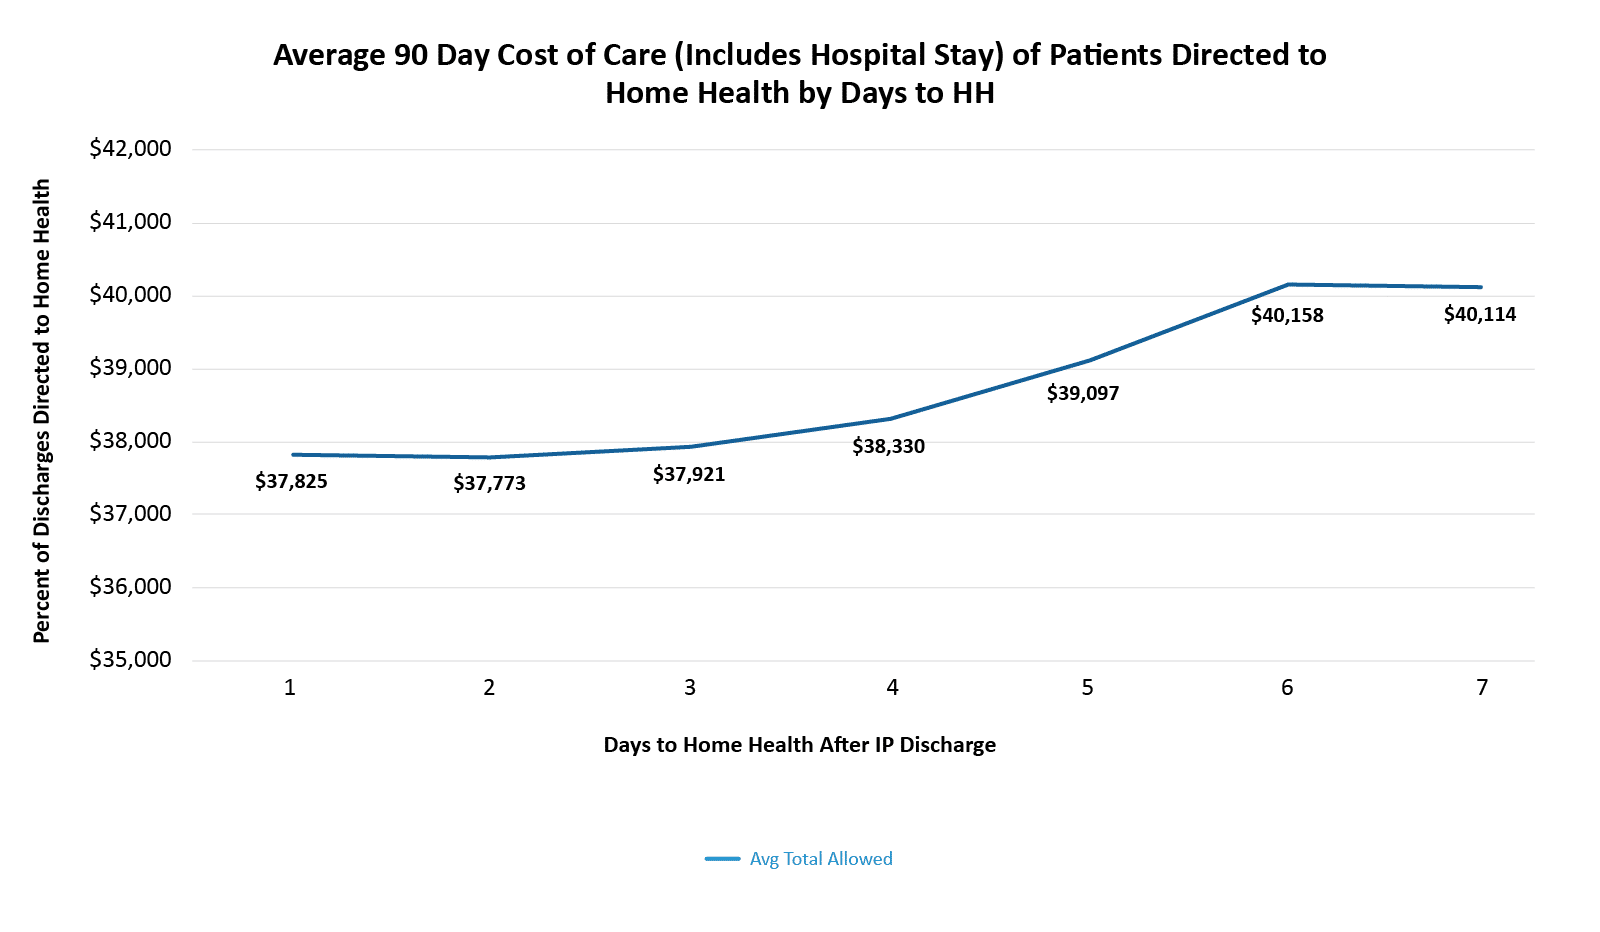 Average 90 Day Cost of Care (Includes Hospital Stay) of Patients Directed to Home Health by Days to HH